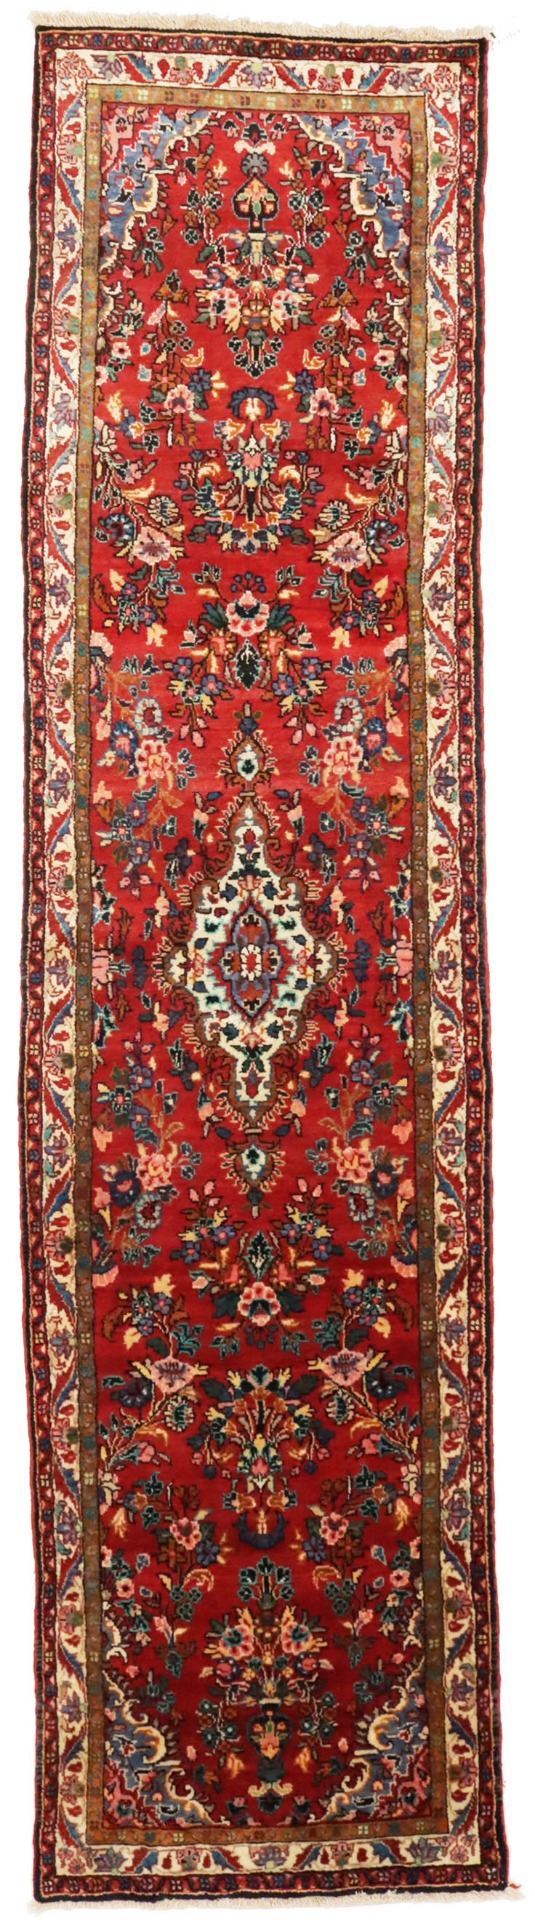 Vintage Red Floral 3X12 Lilian Persian Runner Rug